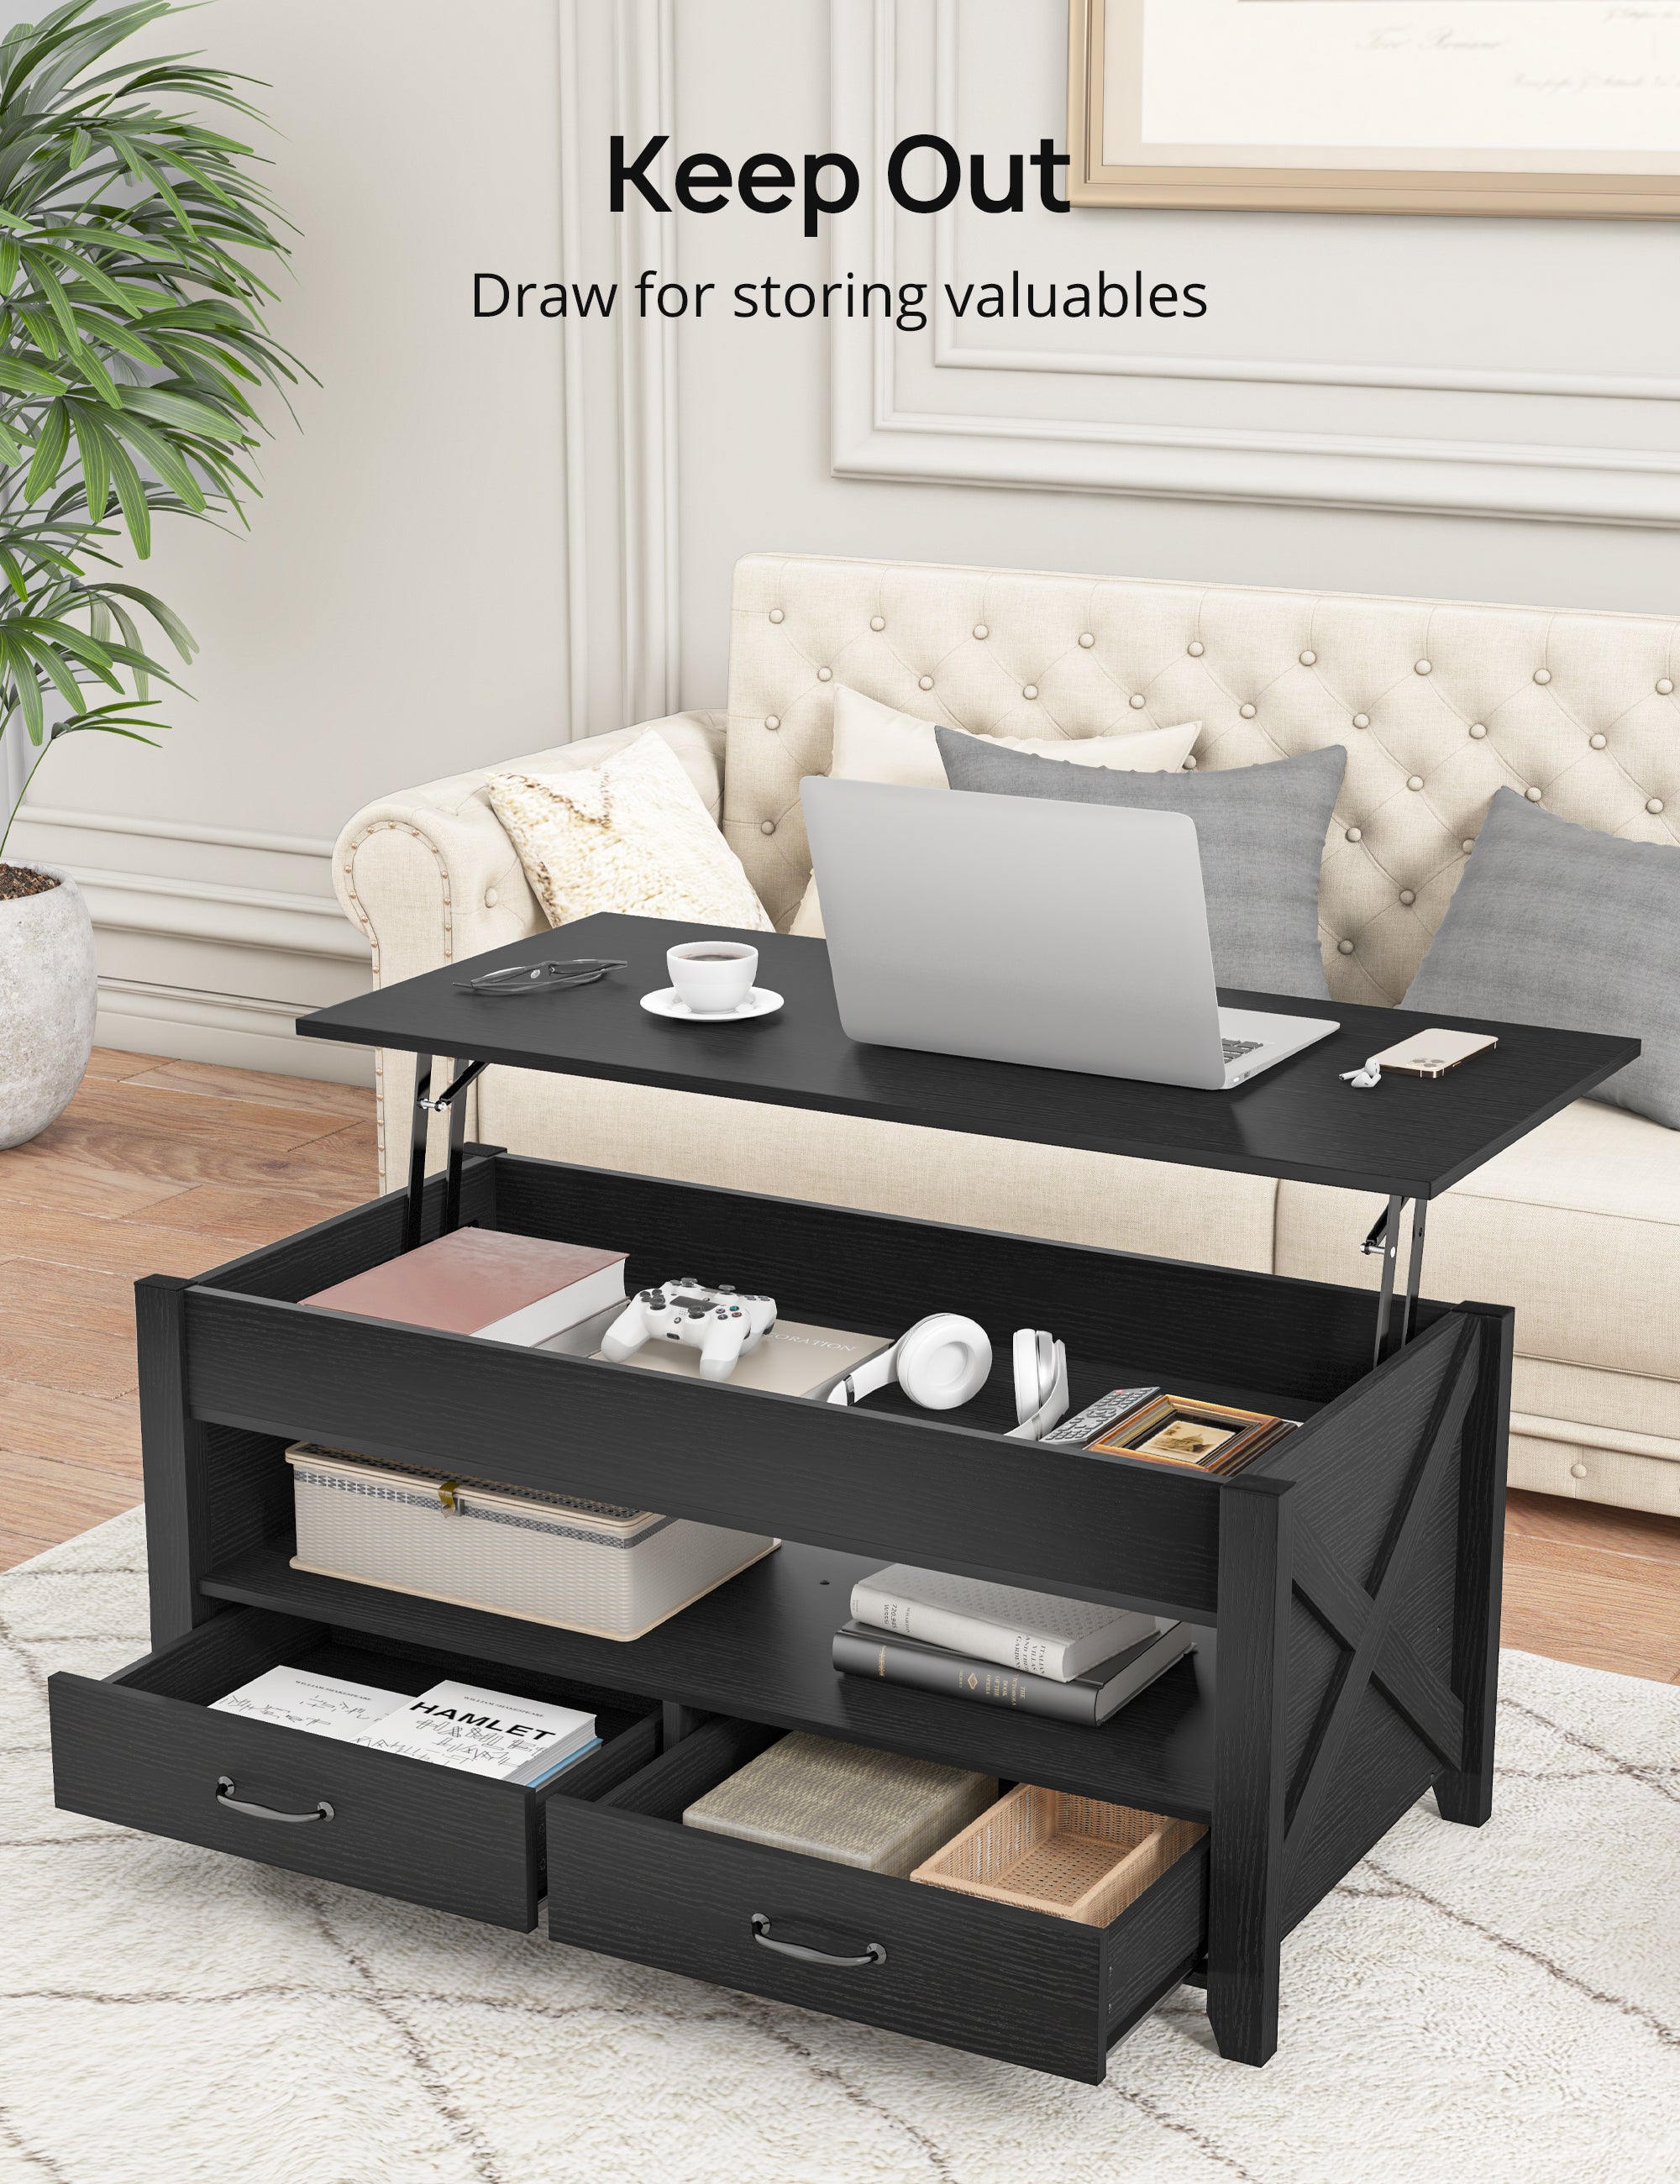 Evajoy LRF005 Lift Top Coffee Table, Modern Coffee Table with 2 Storage Drawers and Hidden Compartment